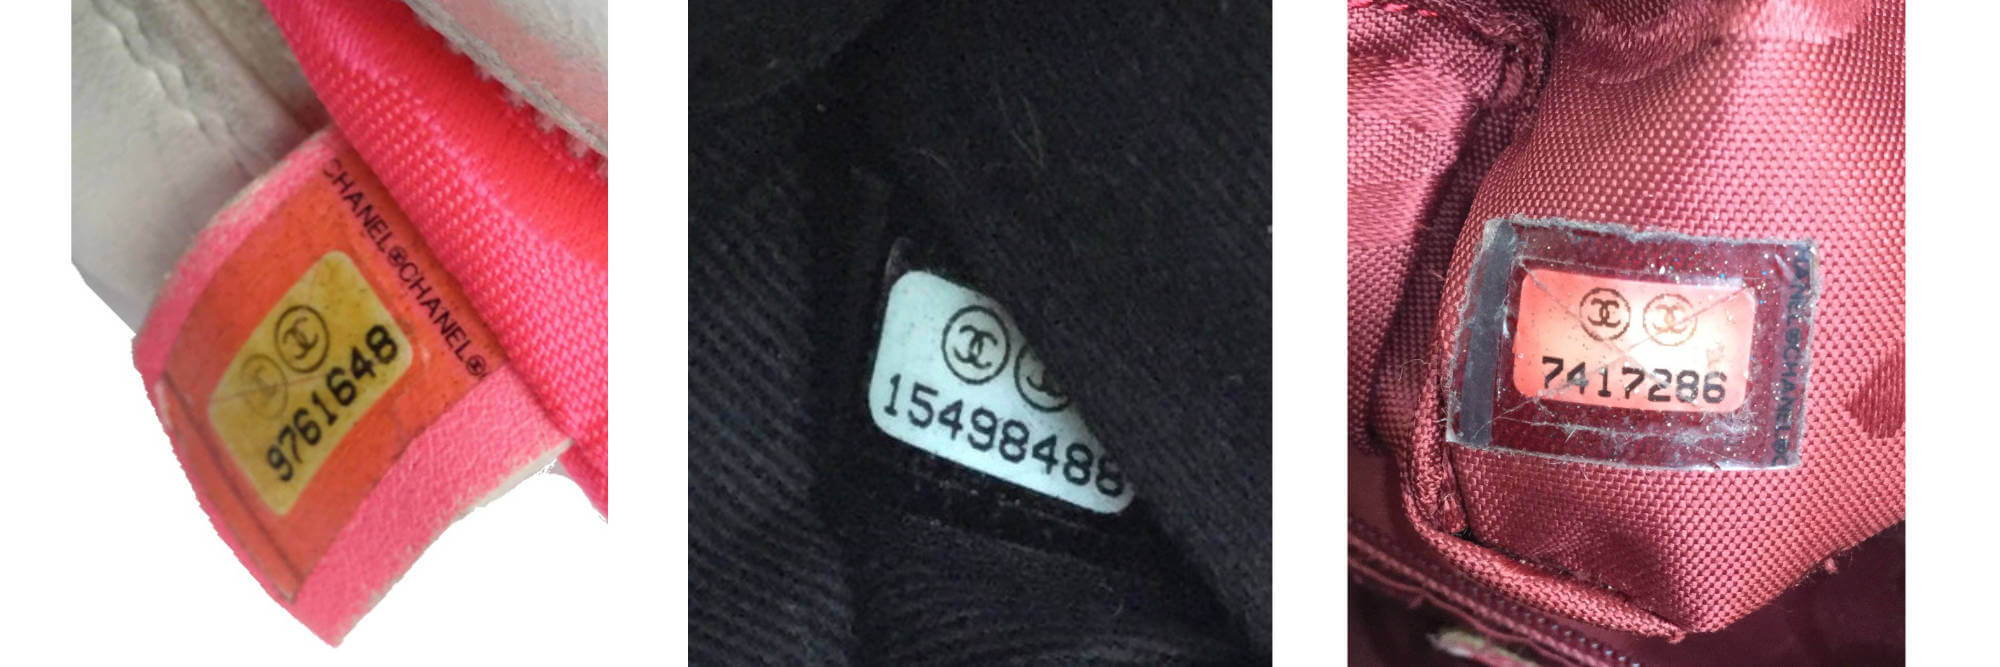 Date code chanel Chanel Costume